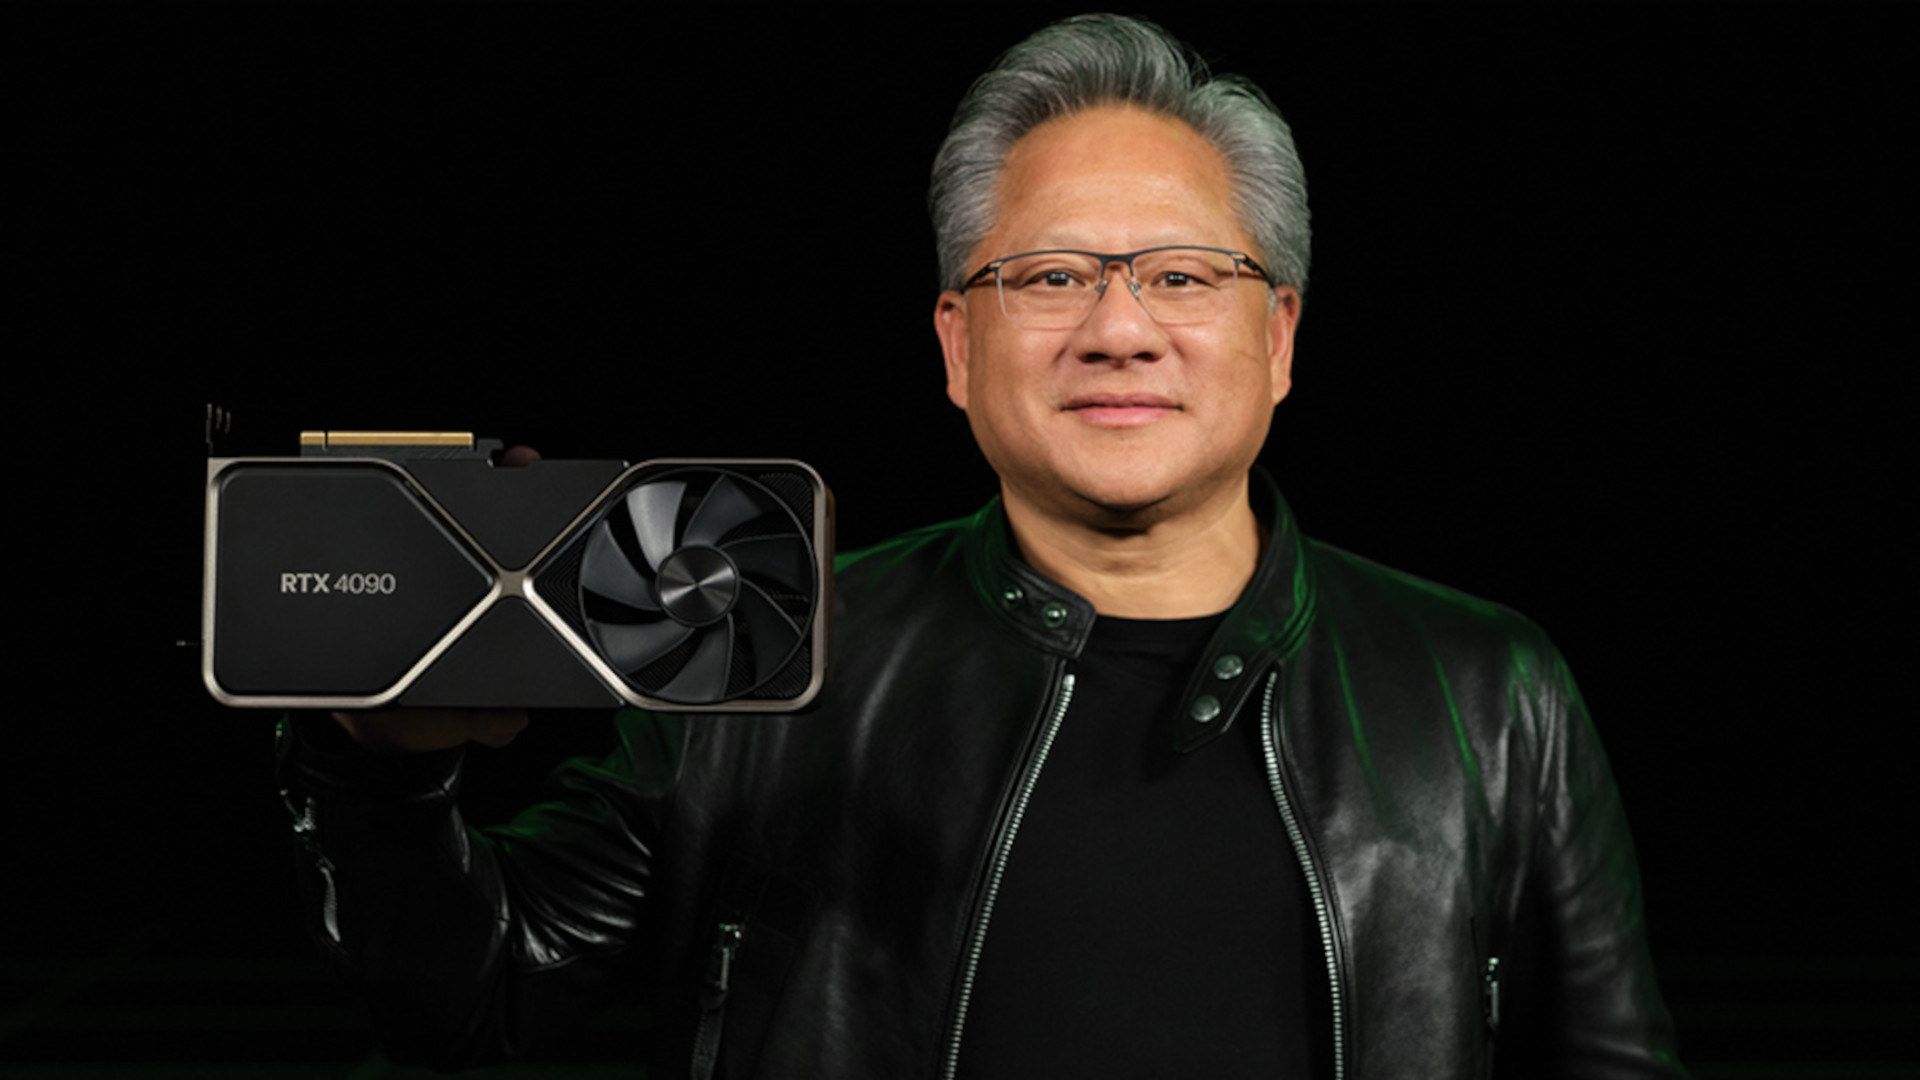 Nvidia CEO Jensen Huang holding an RTX 4090 Founders Edition